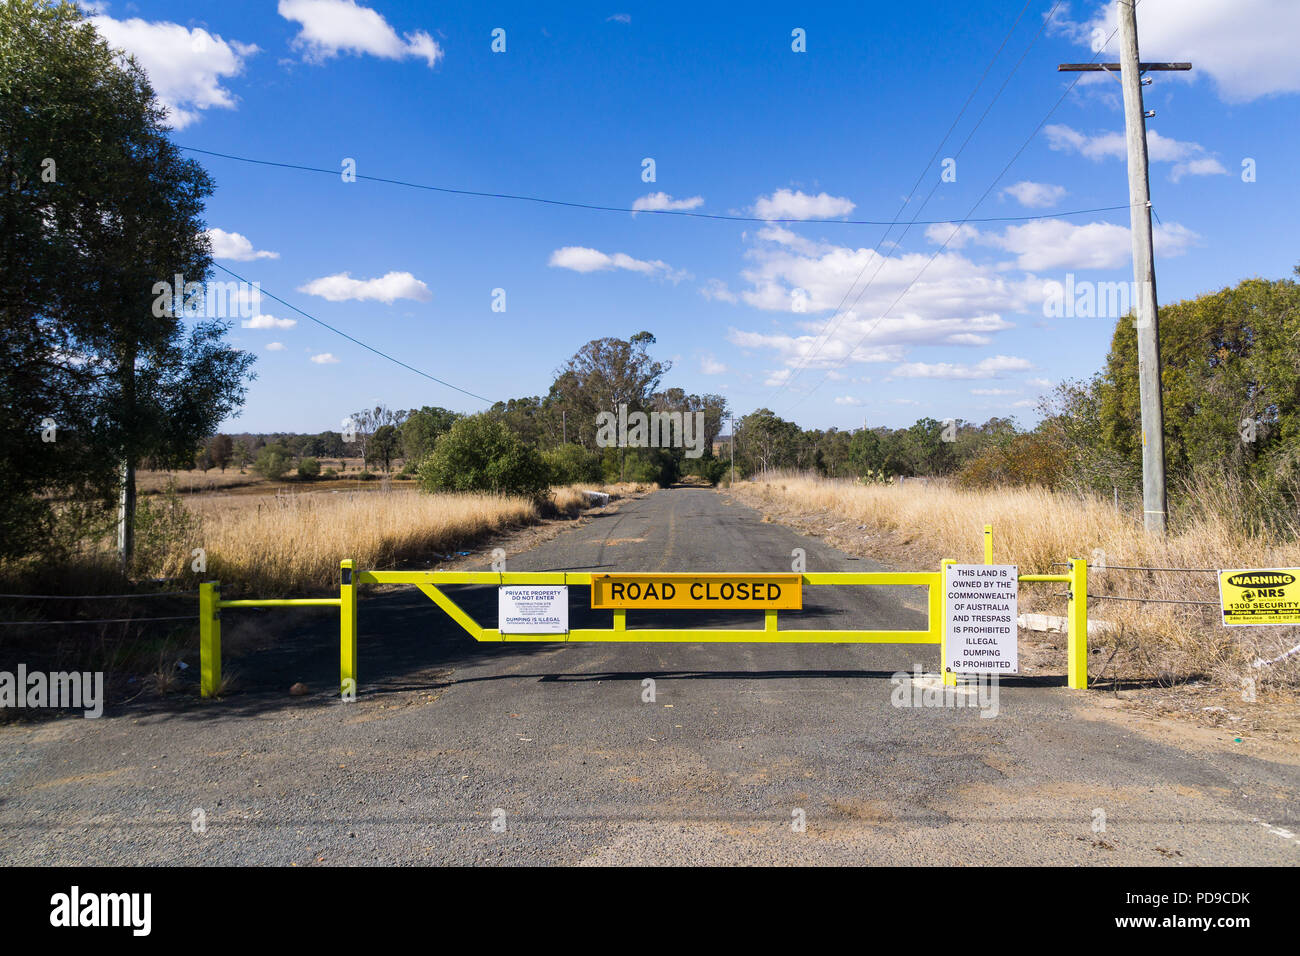 Land at Badgerys Creek Sydney that will be the site of the new Western Sydney Airport Stock Photo